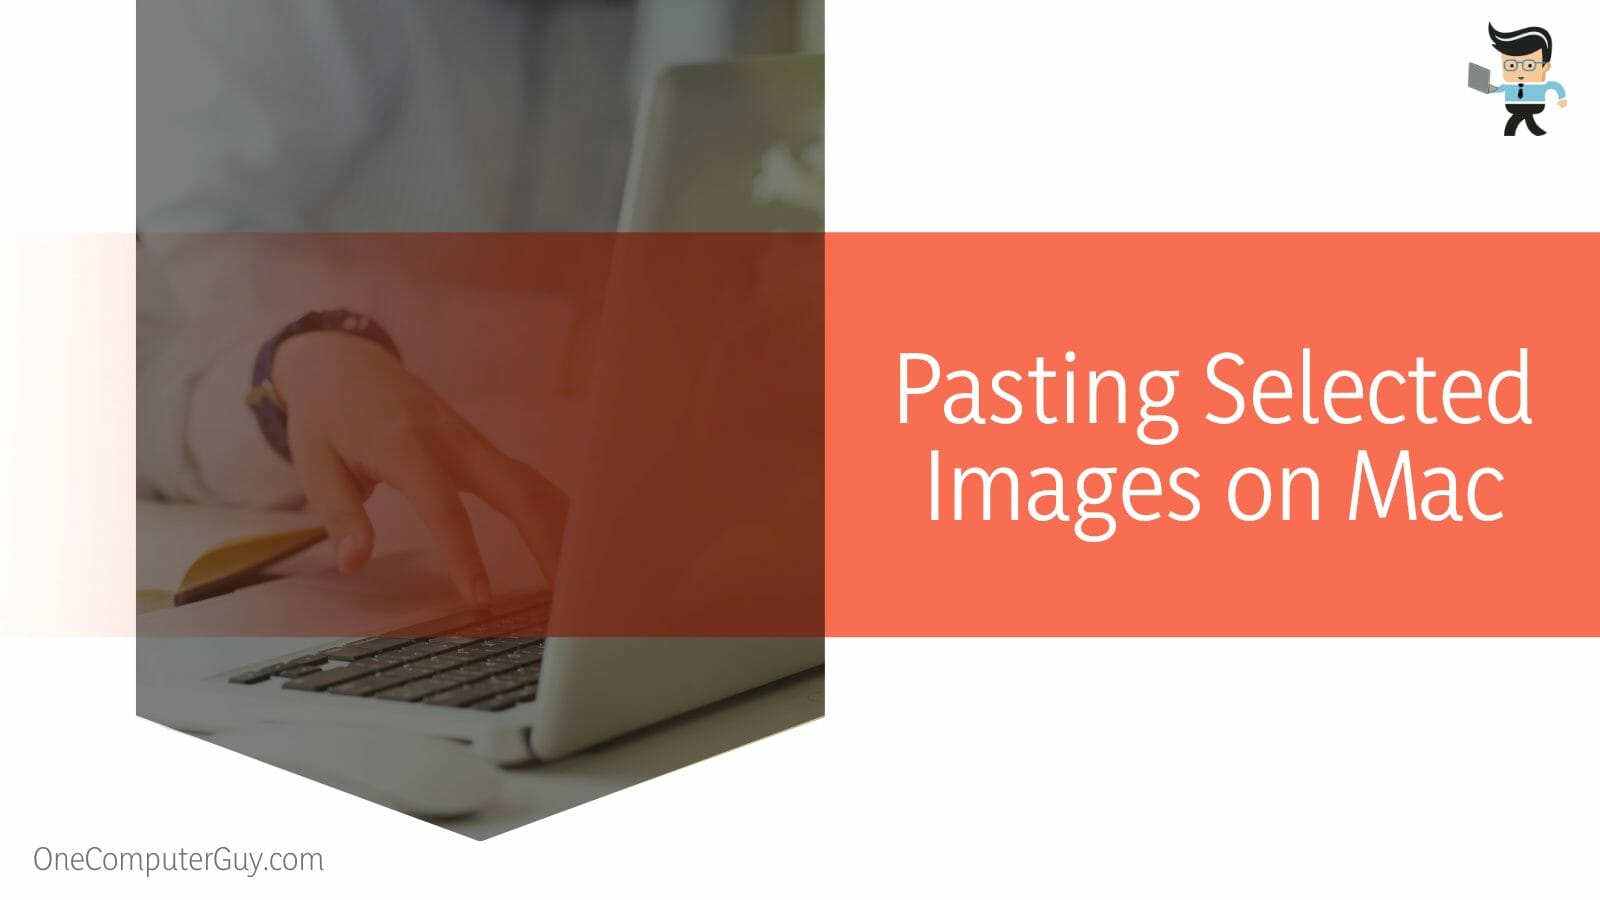 Pasting Selected Images on Mac